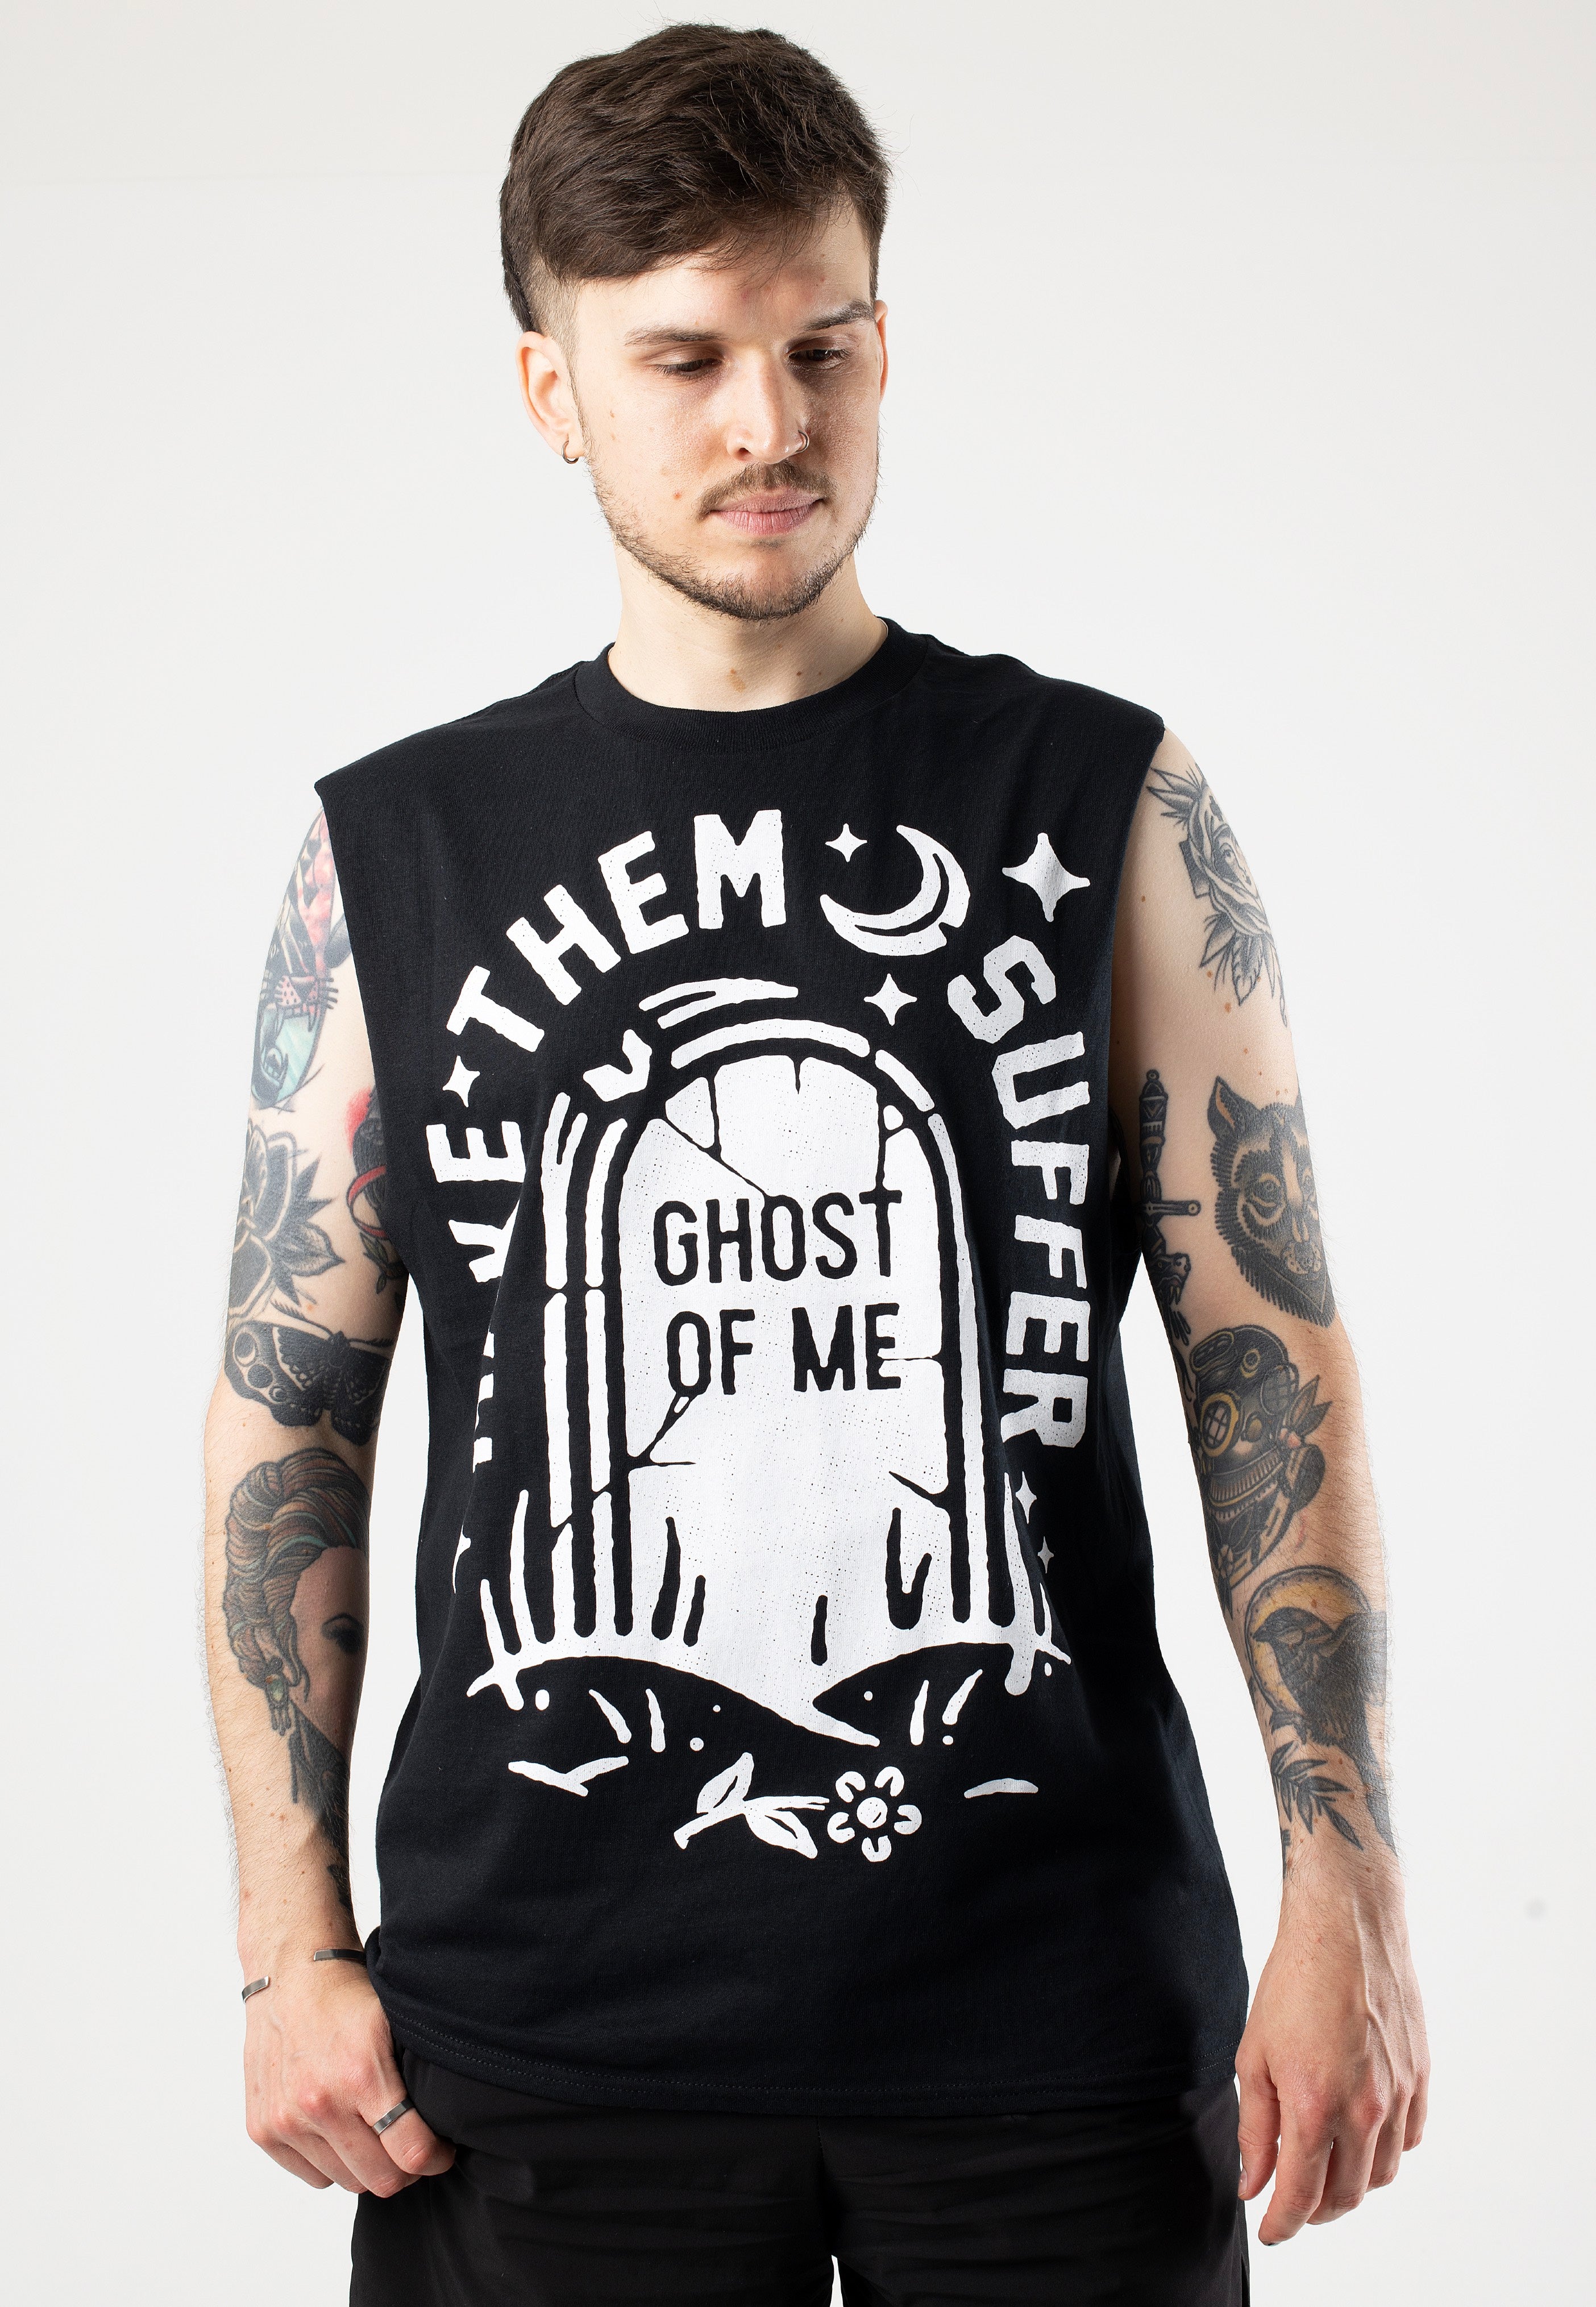 Make Them Suffer - Ghost Of Me - Sleeveless